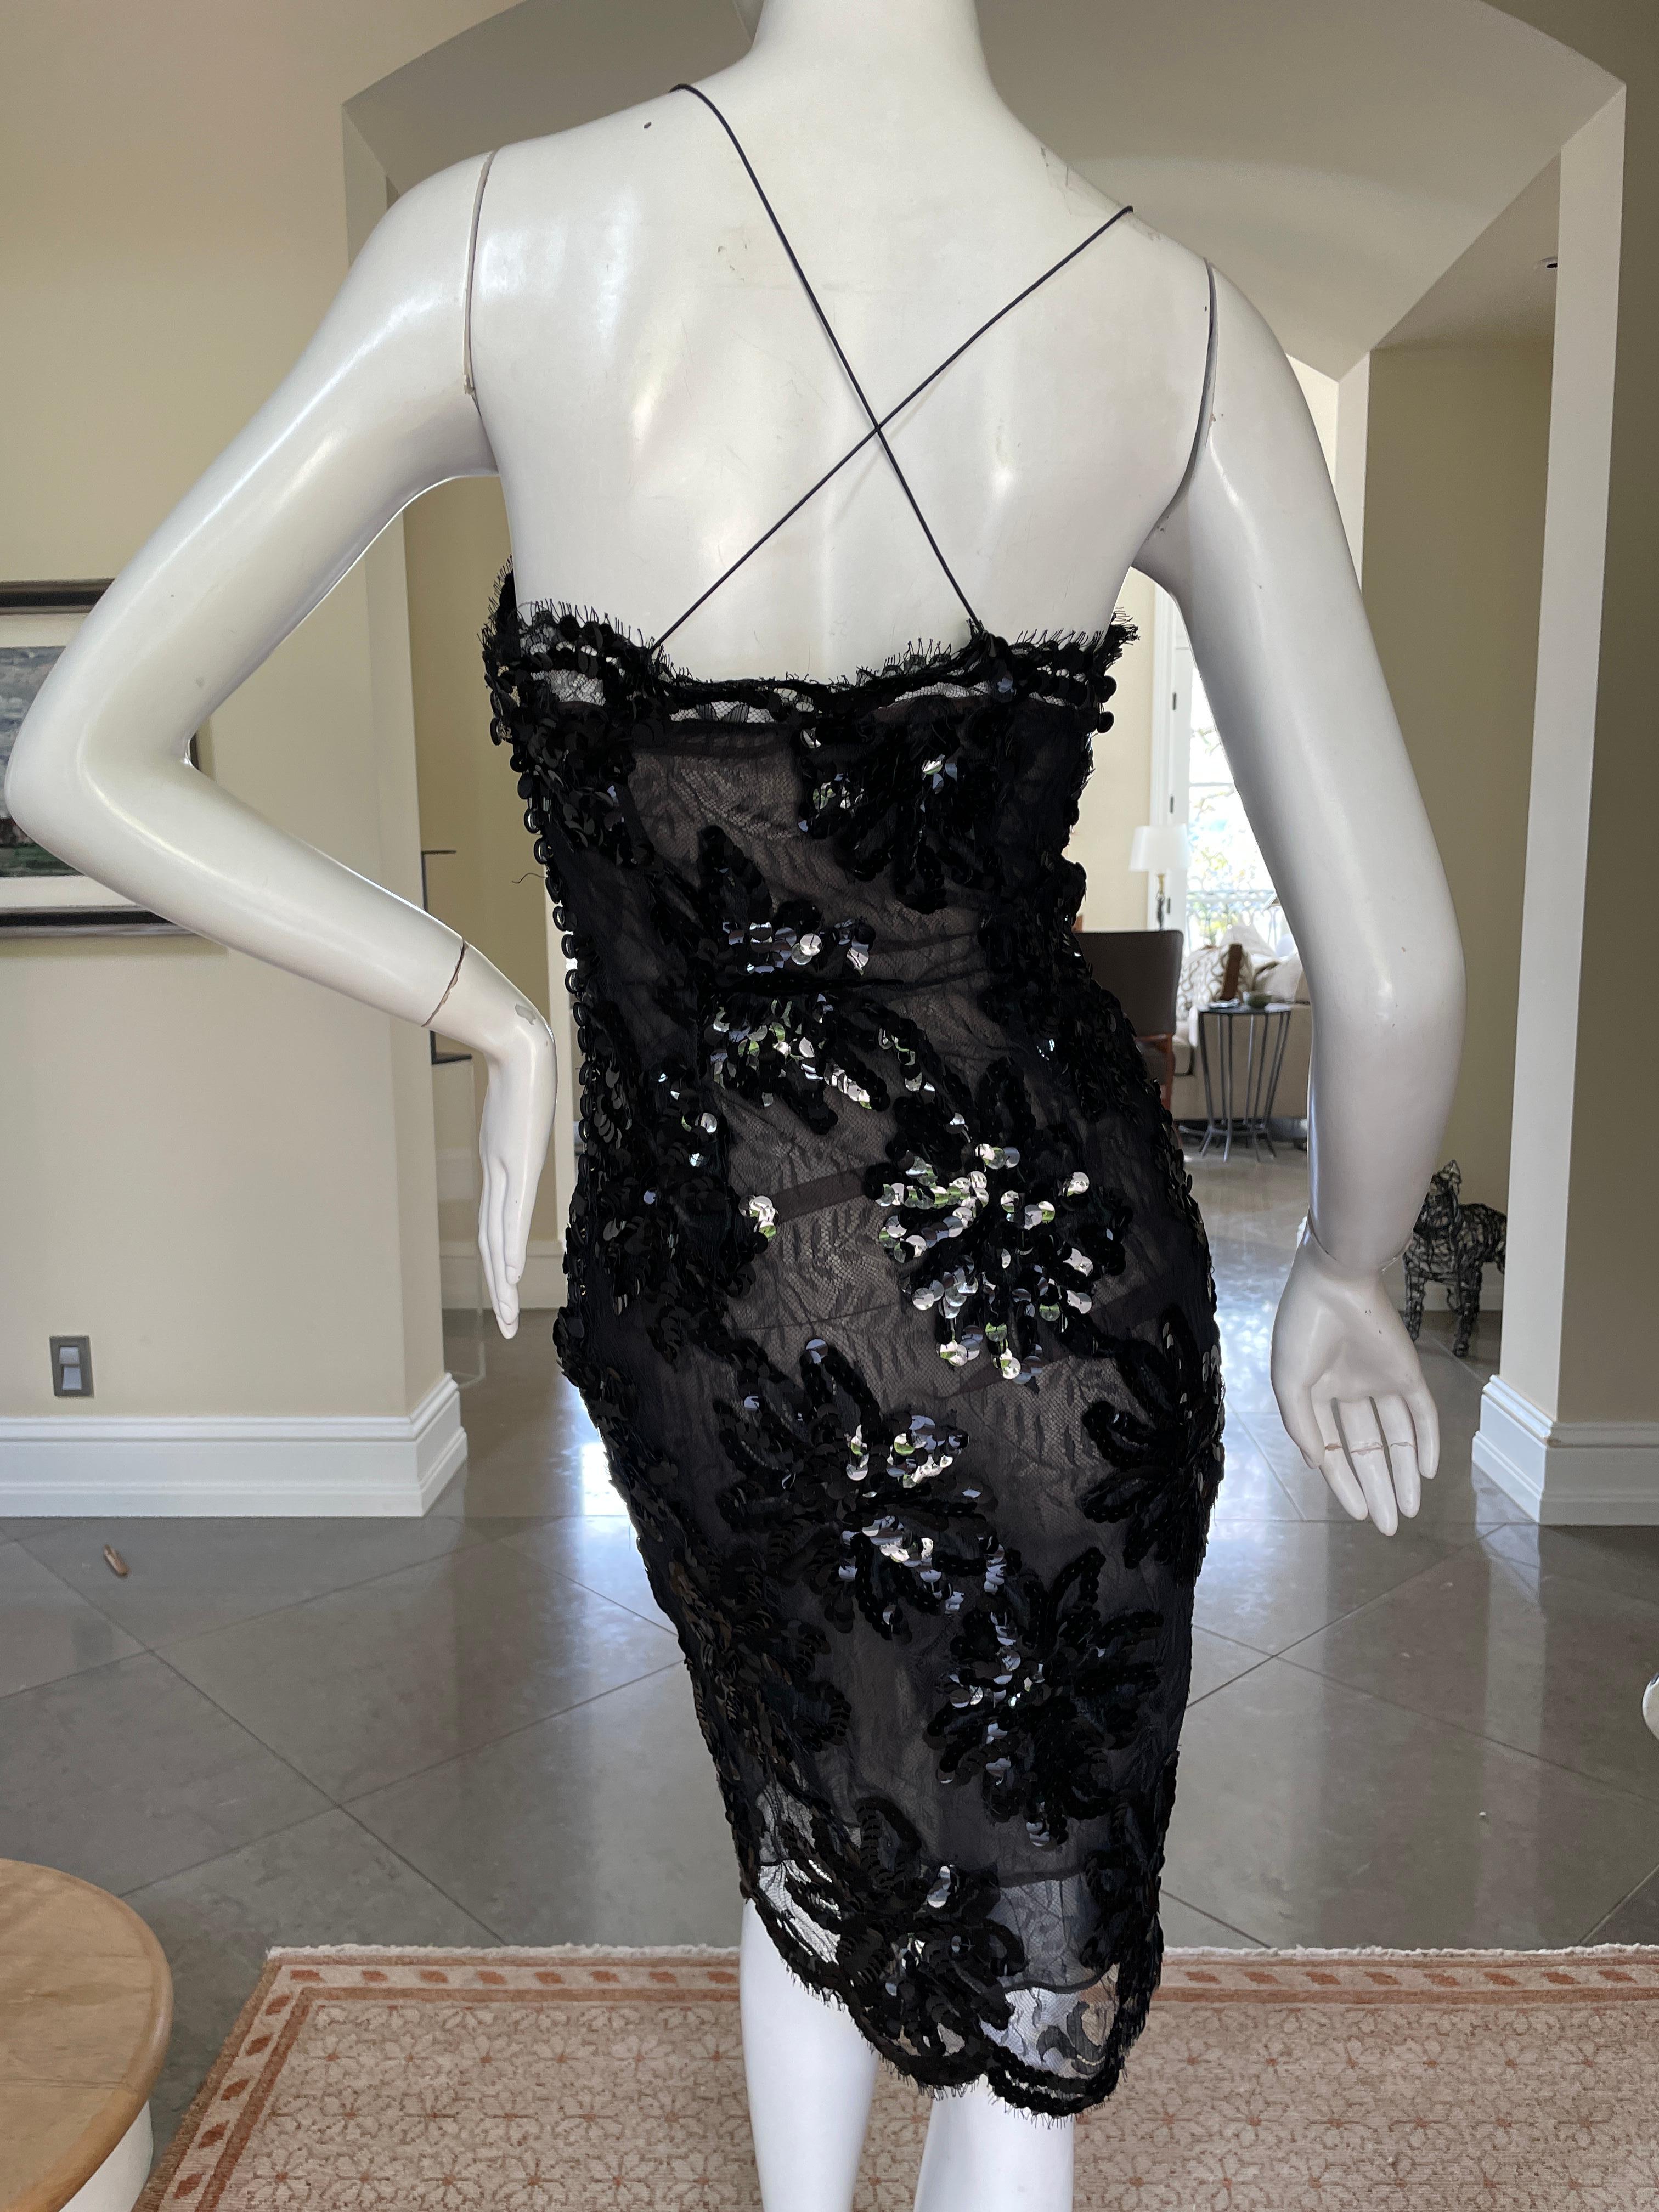  Yves Saint Laurent Rive Gauche 1980's Sheer Black Sequin Cocktail Dress  In Excellent Condition For Sale In Cloverdale, CA